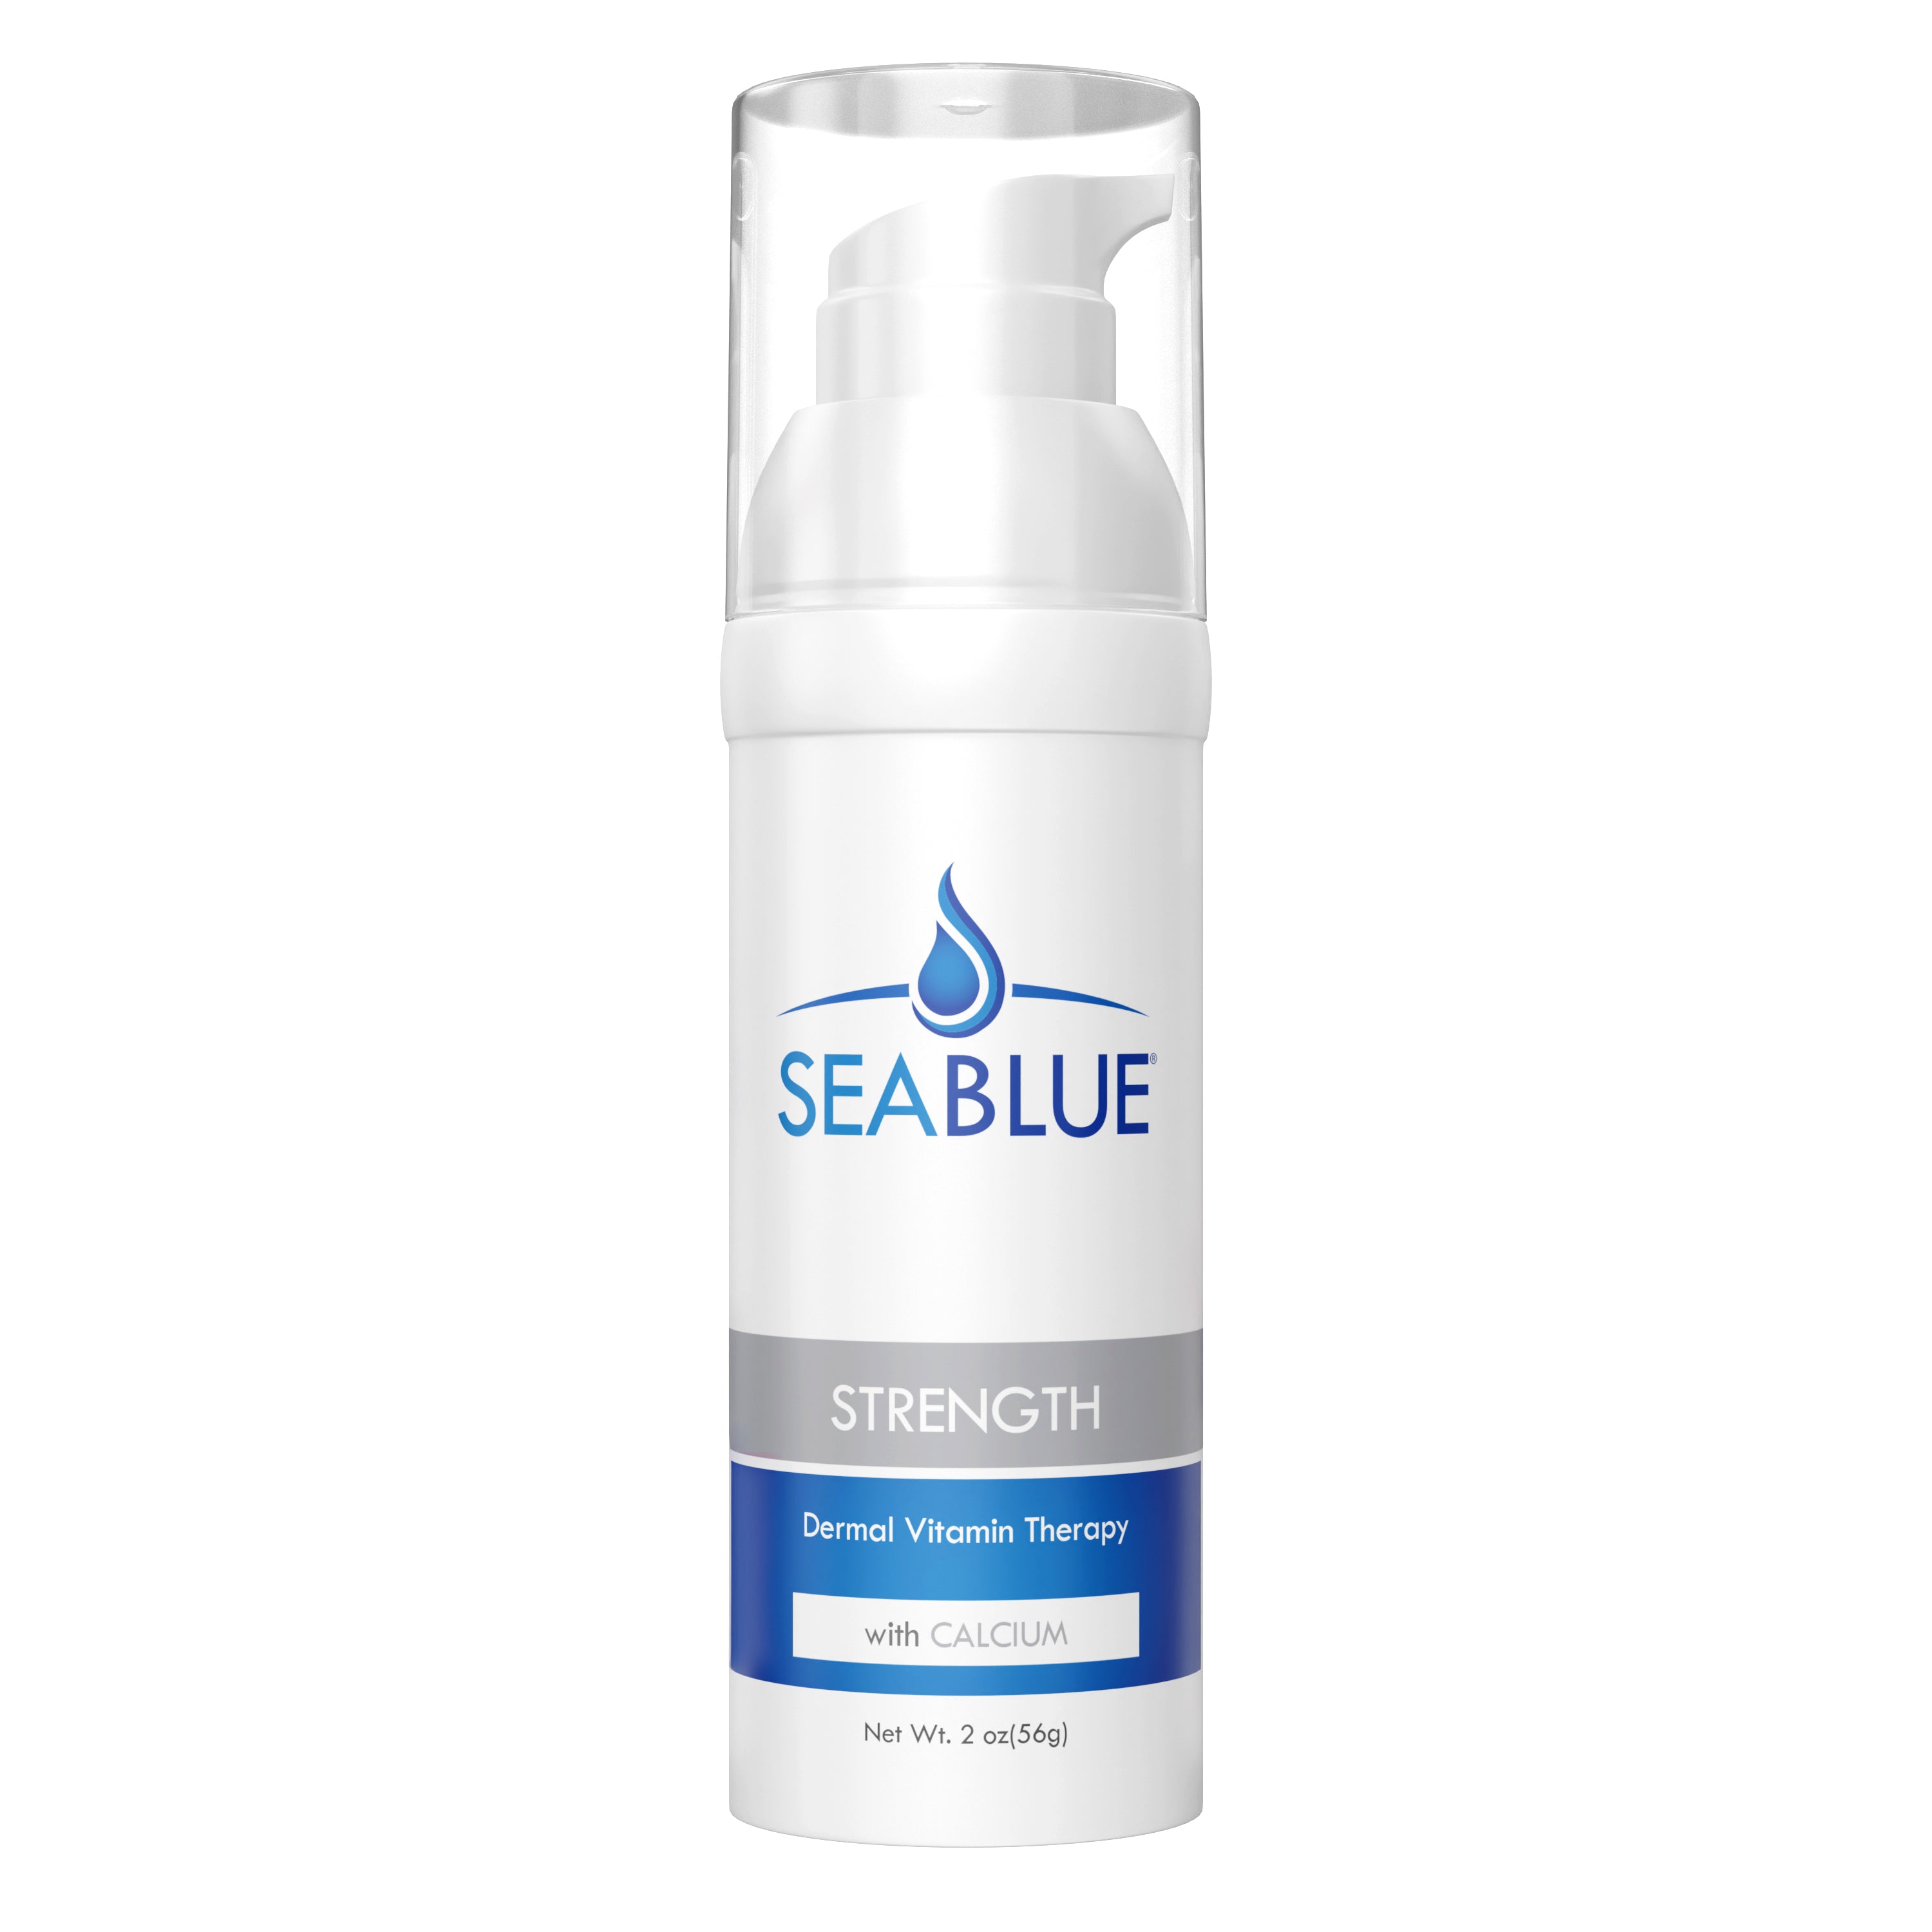 Seablue Strength Dermal Vitamin Therapy With Calcium